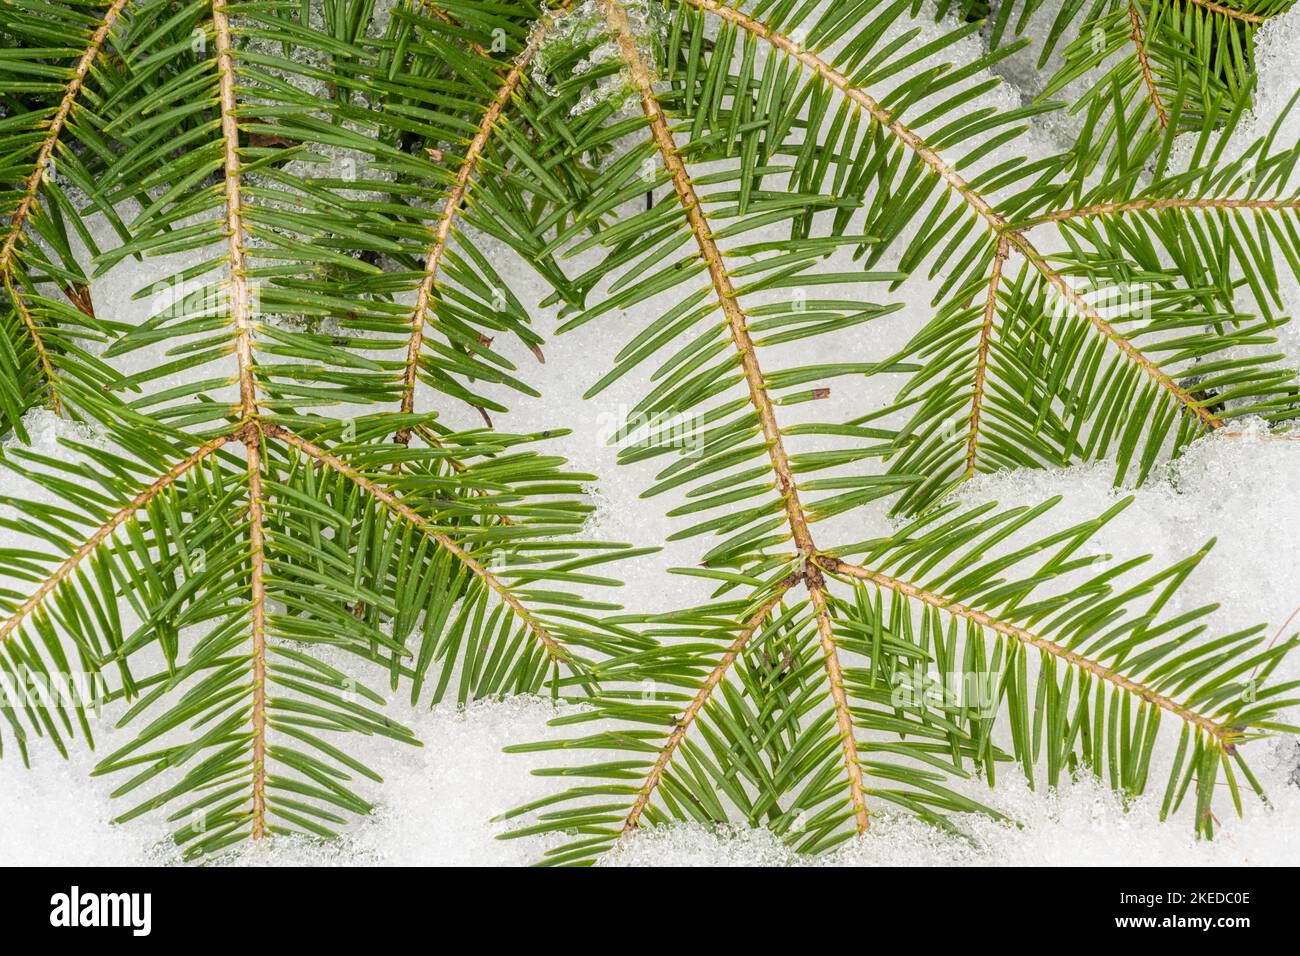 Balsam fir (Abies balsamea) bough and needles and spring snow, Greater Sudbury, Ontario, Canada Stock Photo